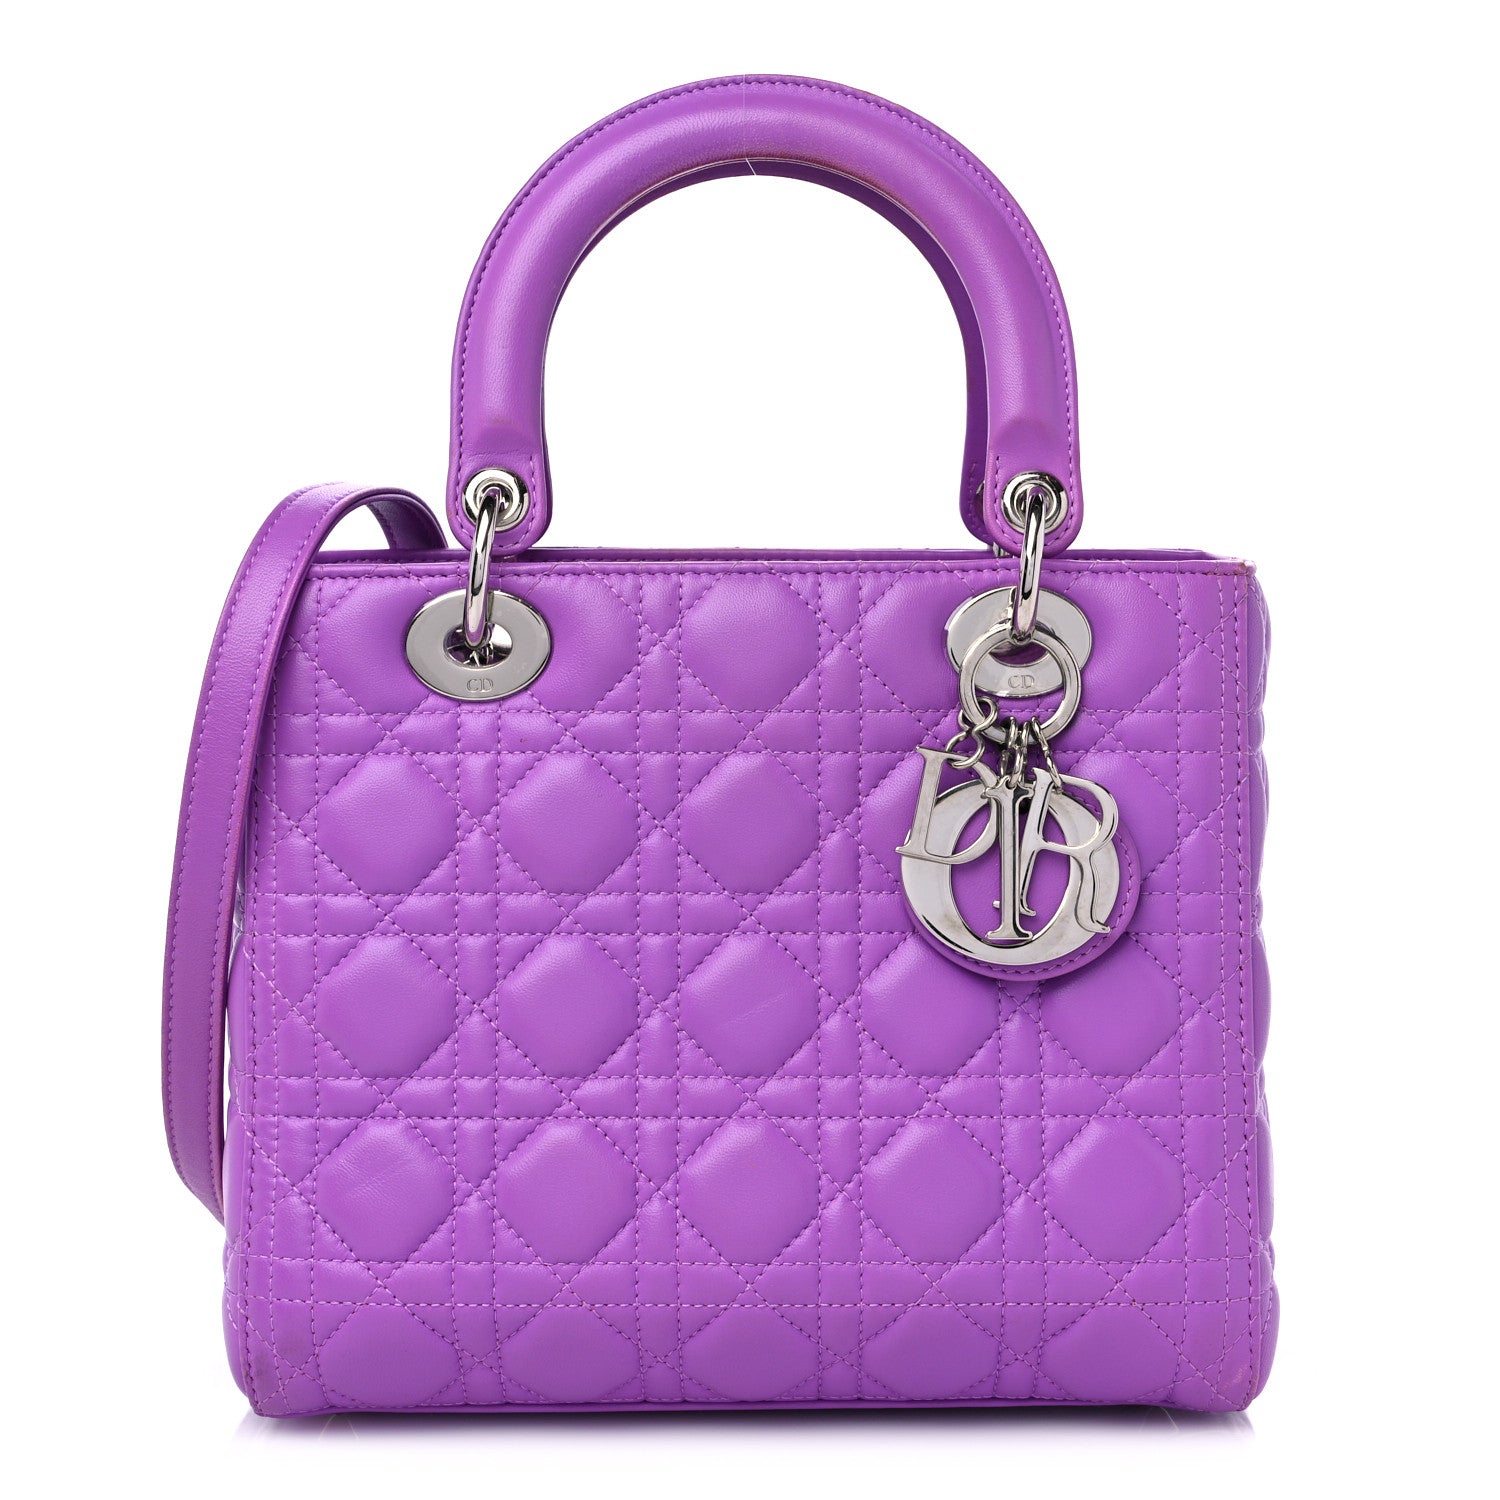 how much is lady dior bag